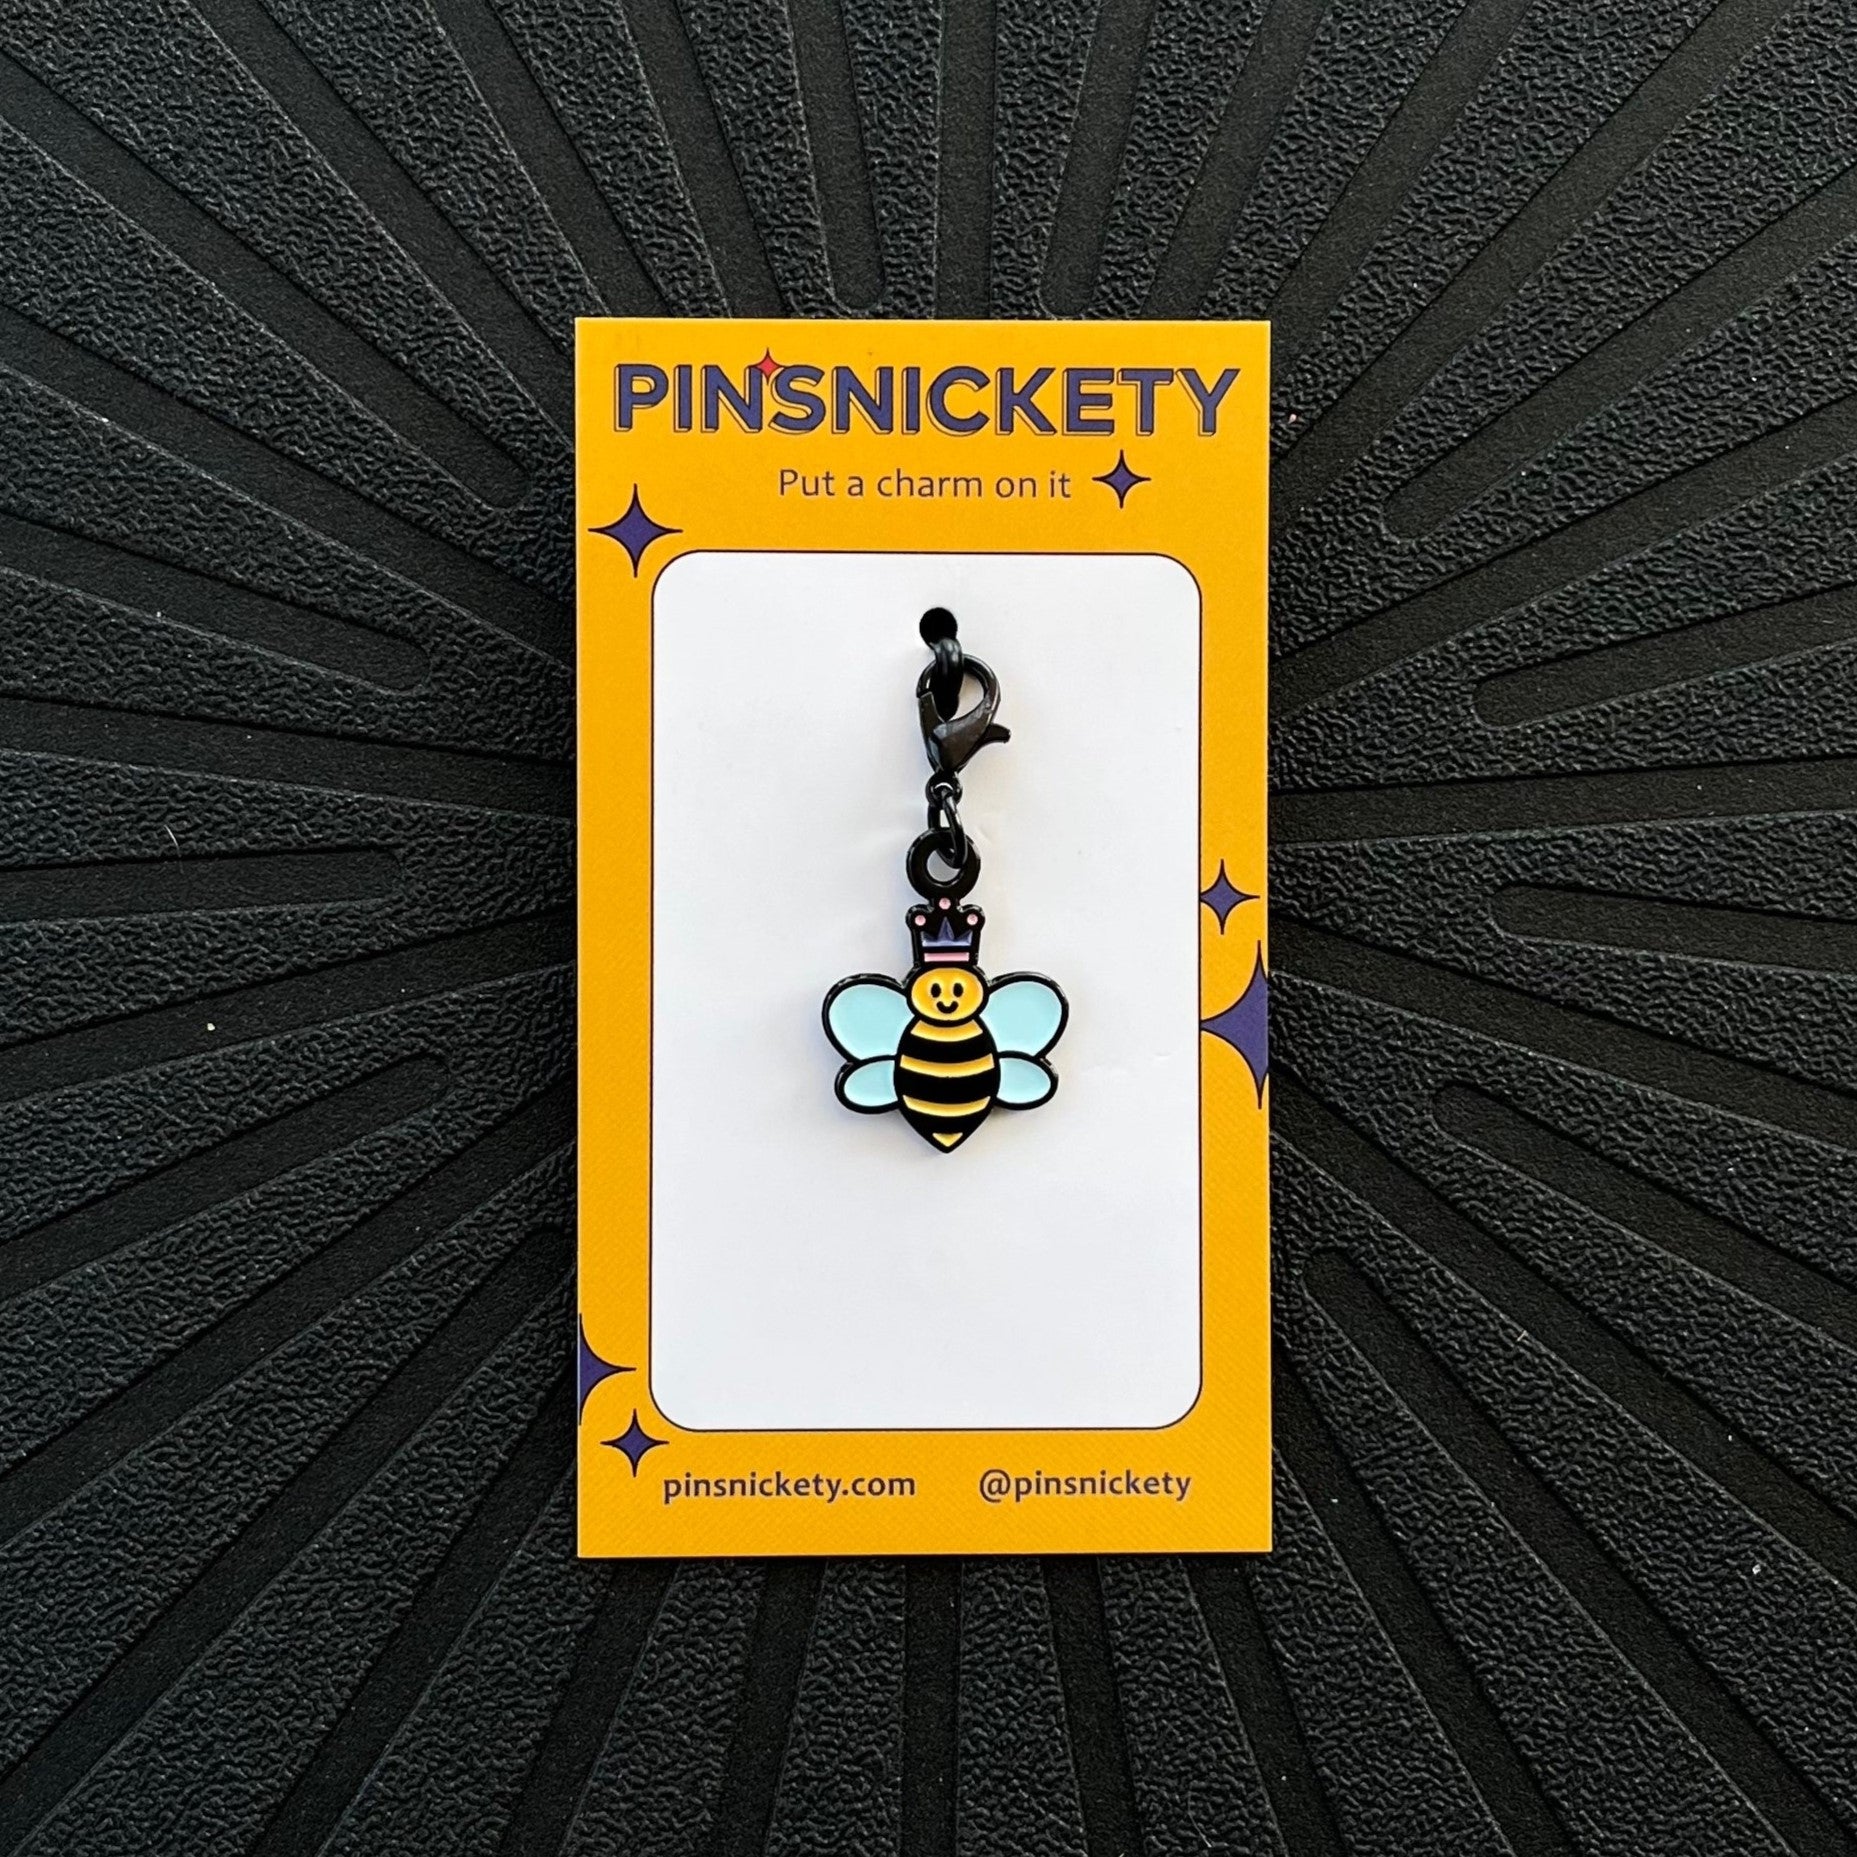 pinsnickety queen bee braid brildle and bonnet charm on a black background